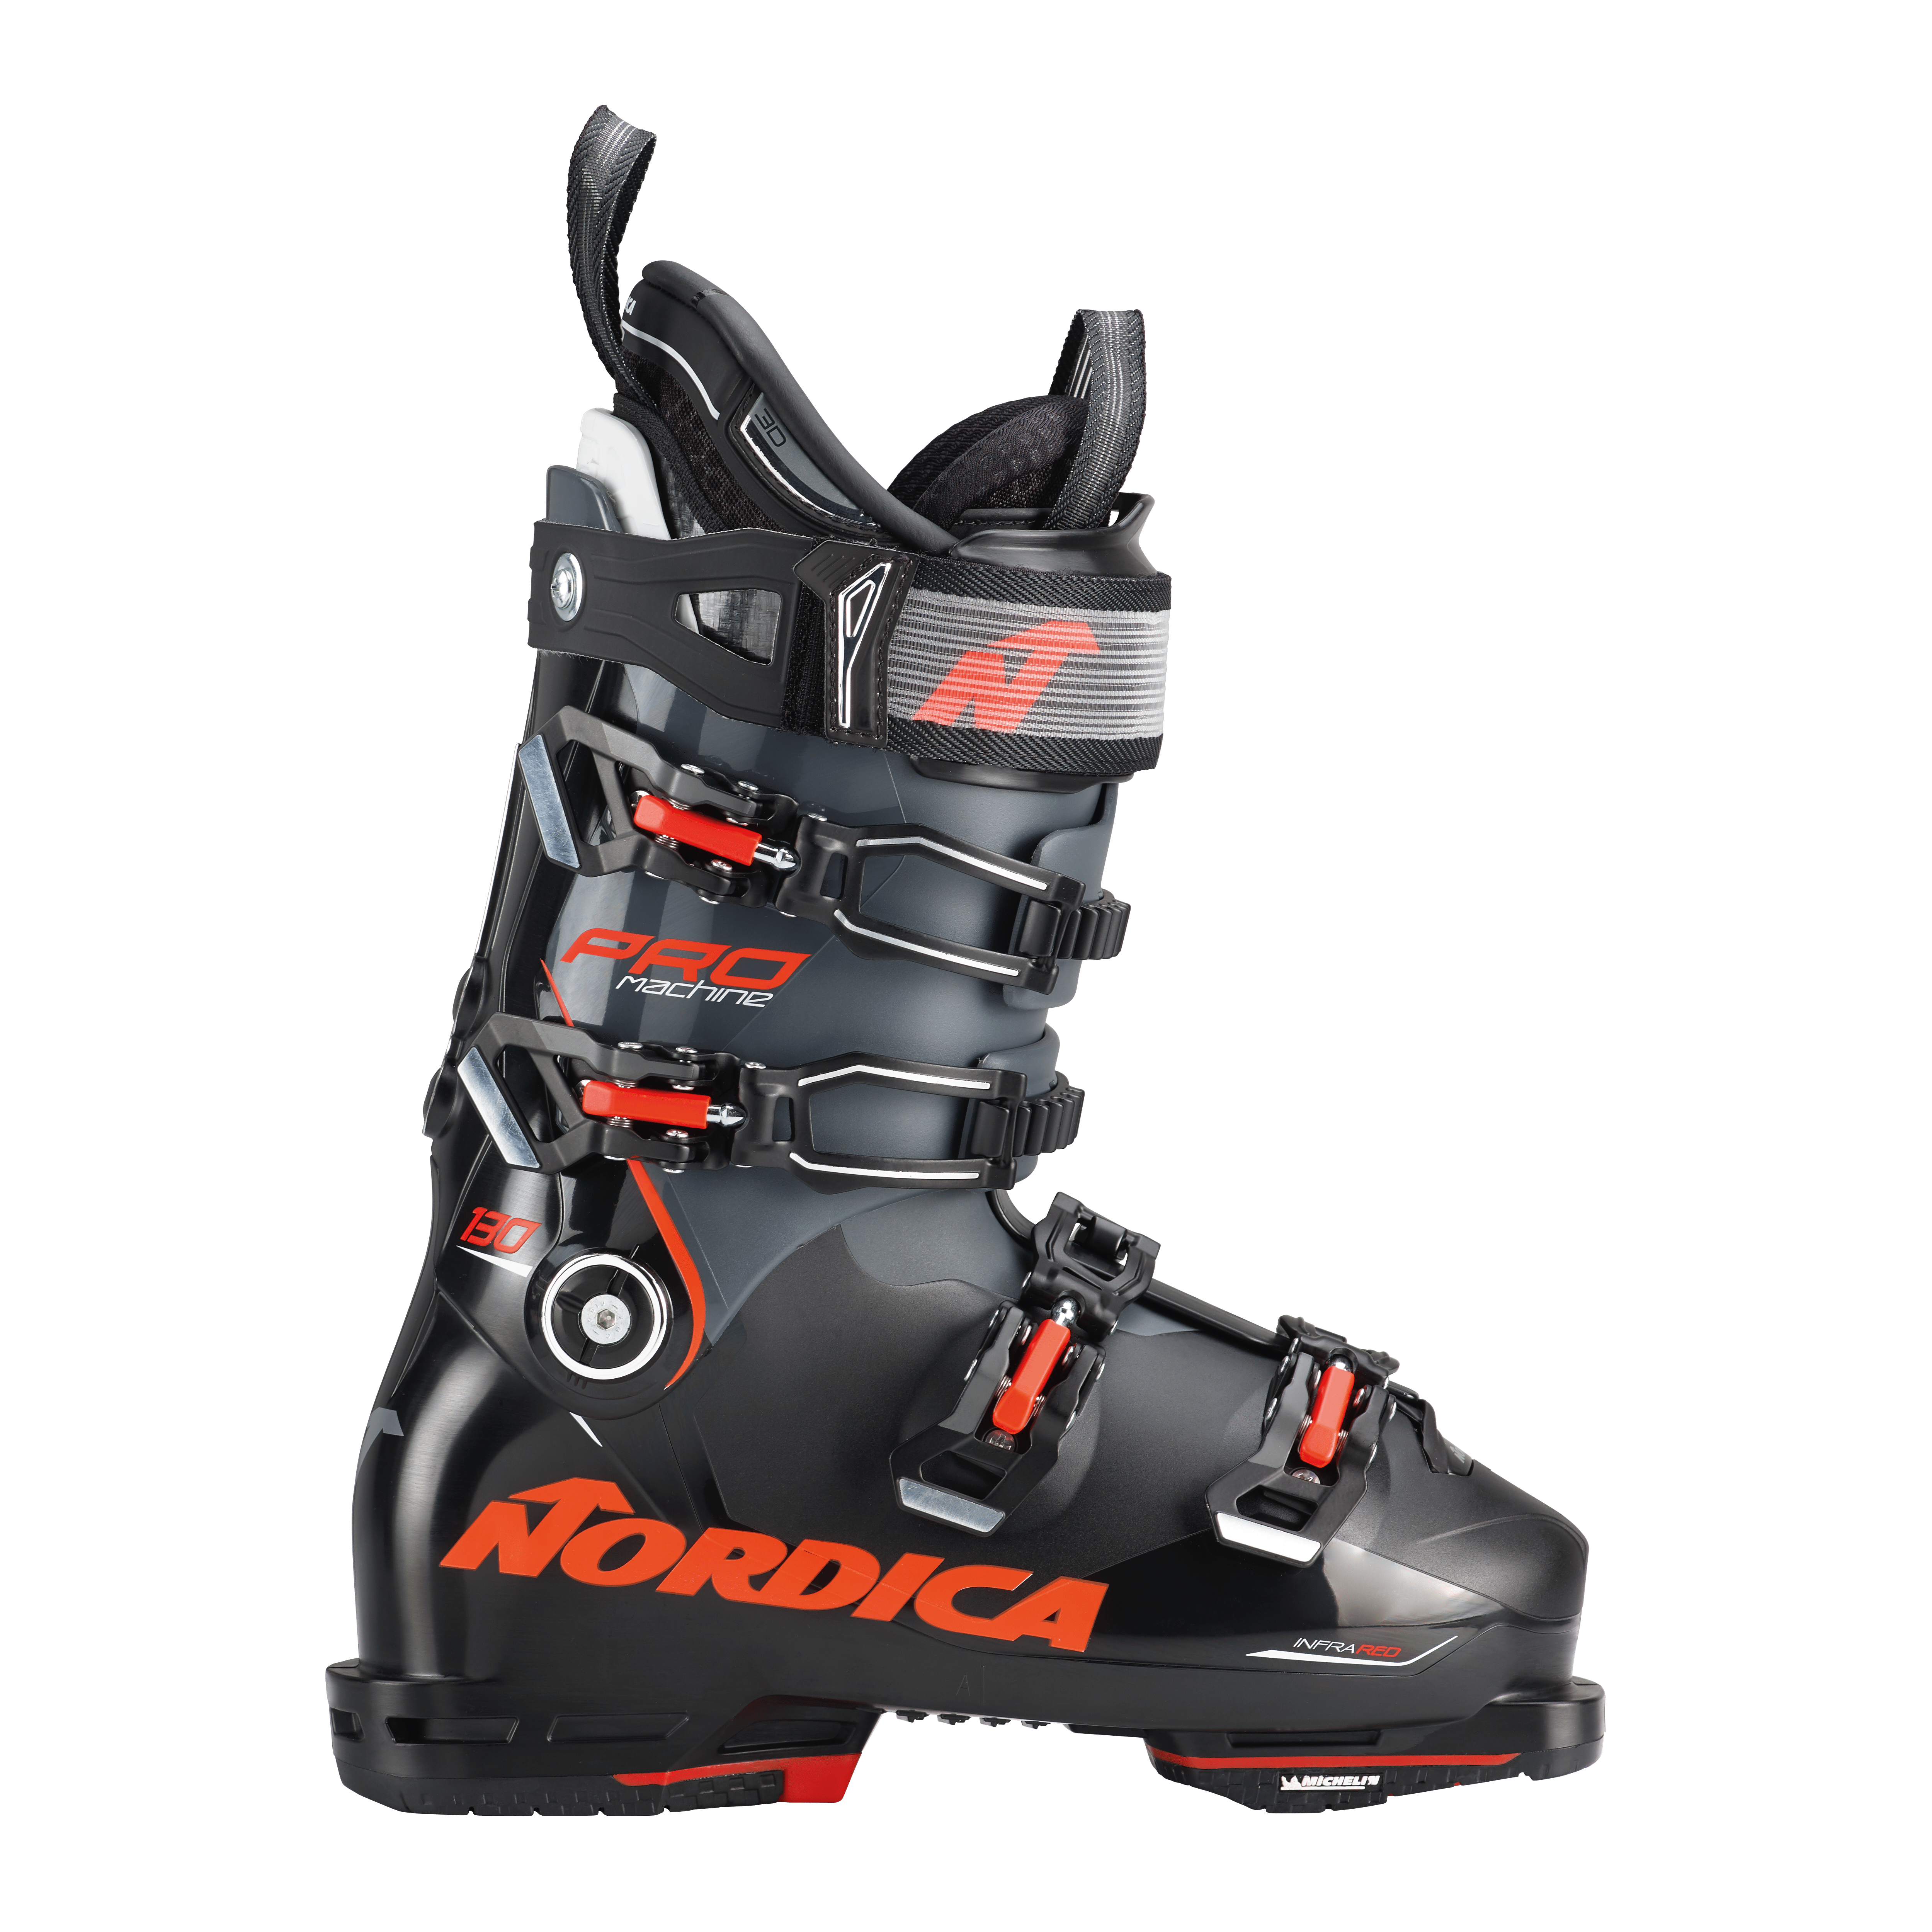 hay Be satisfied Steadily BOOTS Nordica - Skis and Boots – Official website